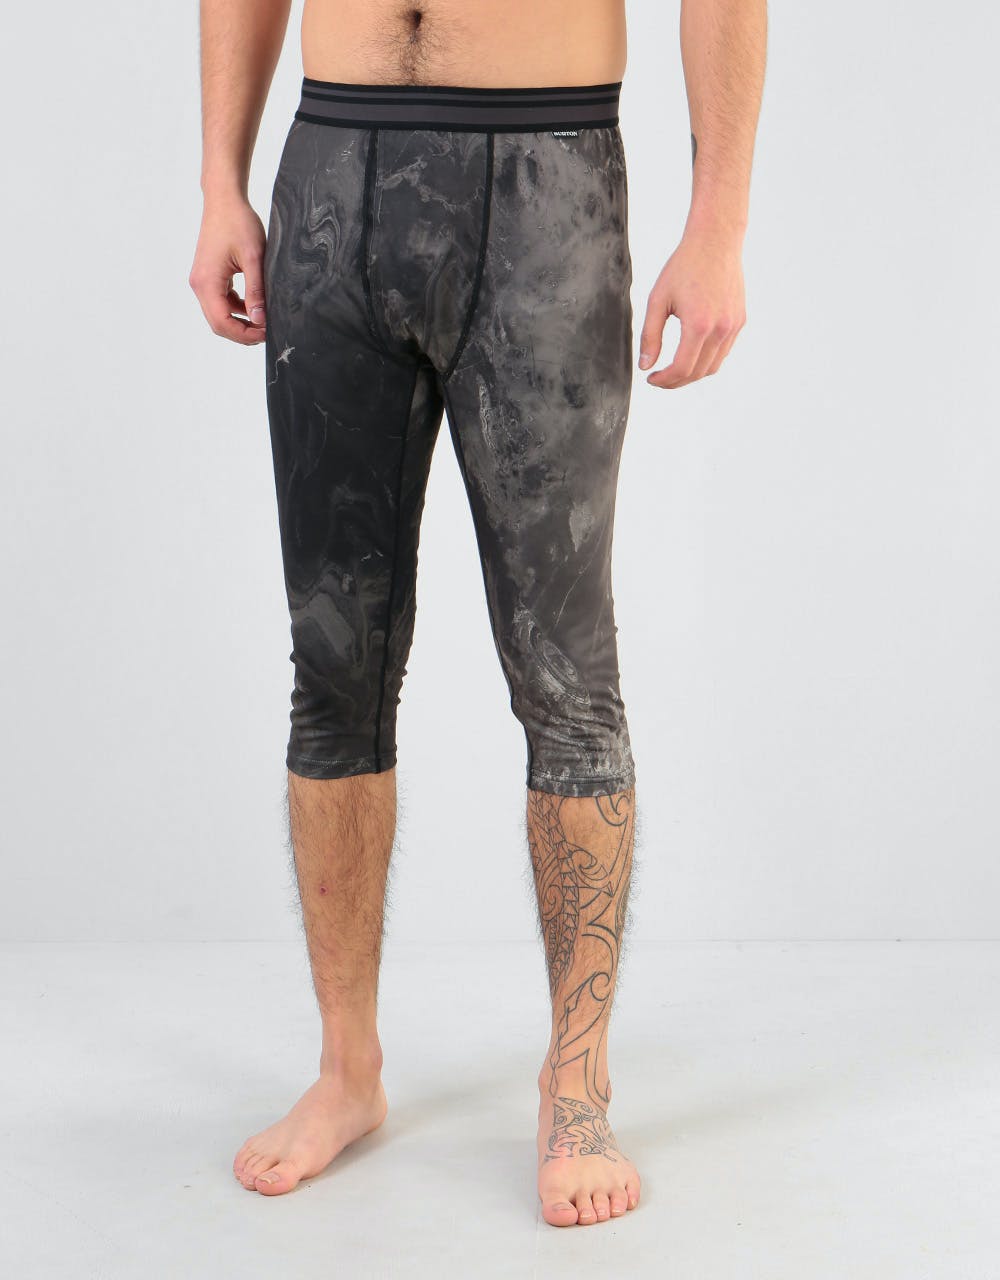 Burton Midweight Shant Thermal Bottoms - Marble Galaxy